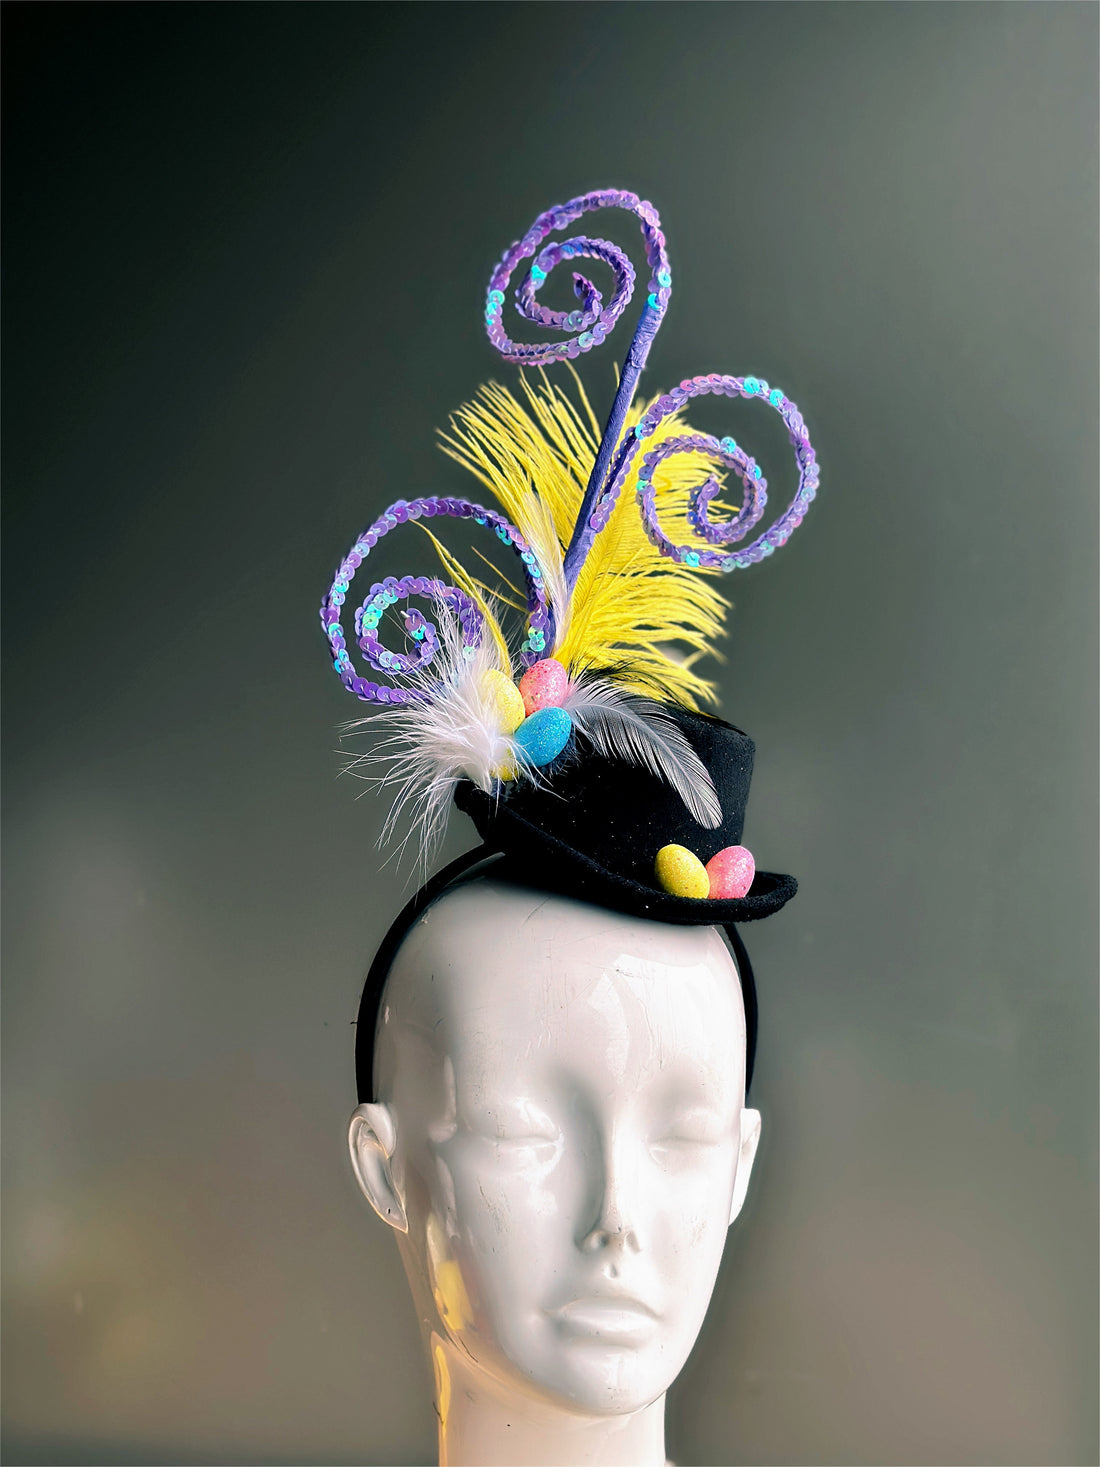 Black hat with purple swirls, feathers, and colorful Easter eggs.